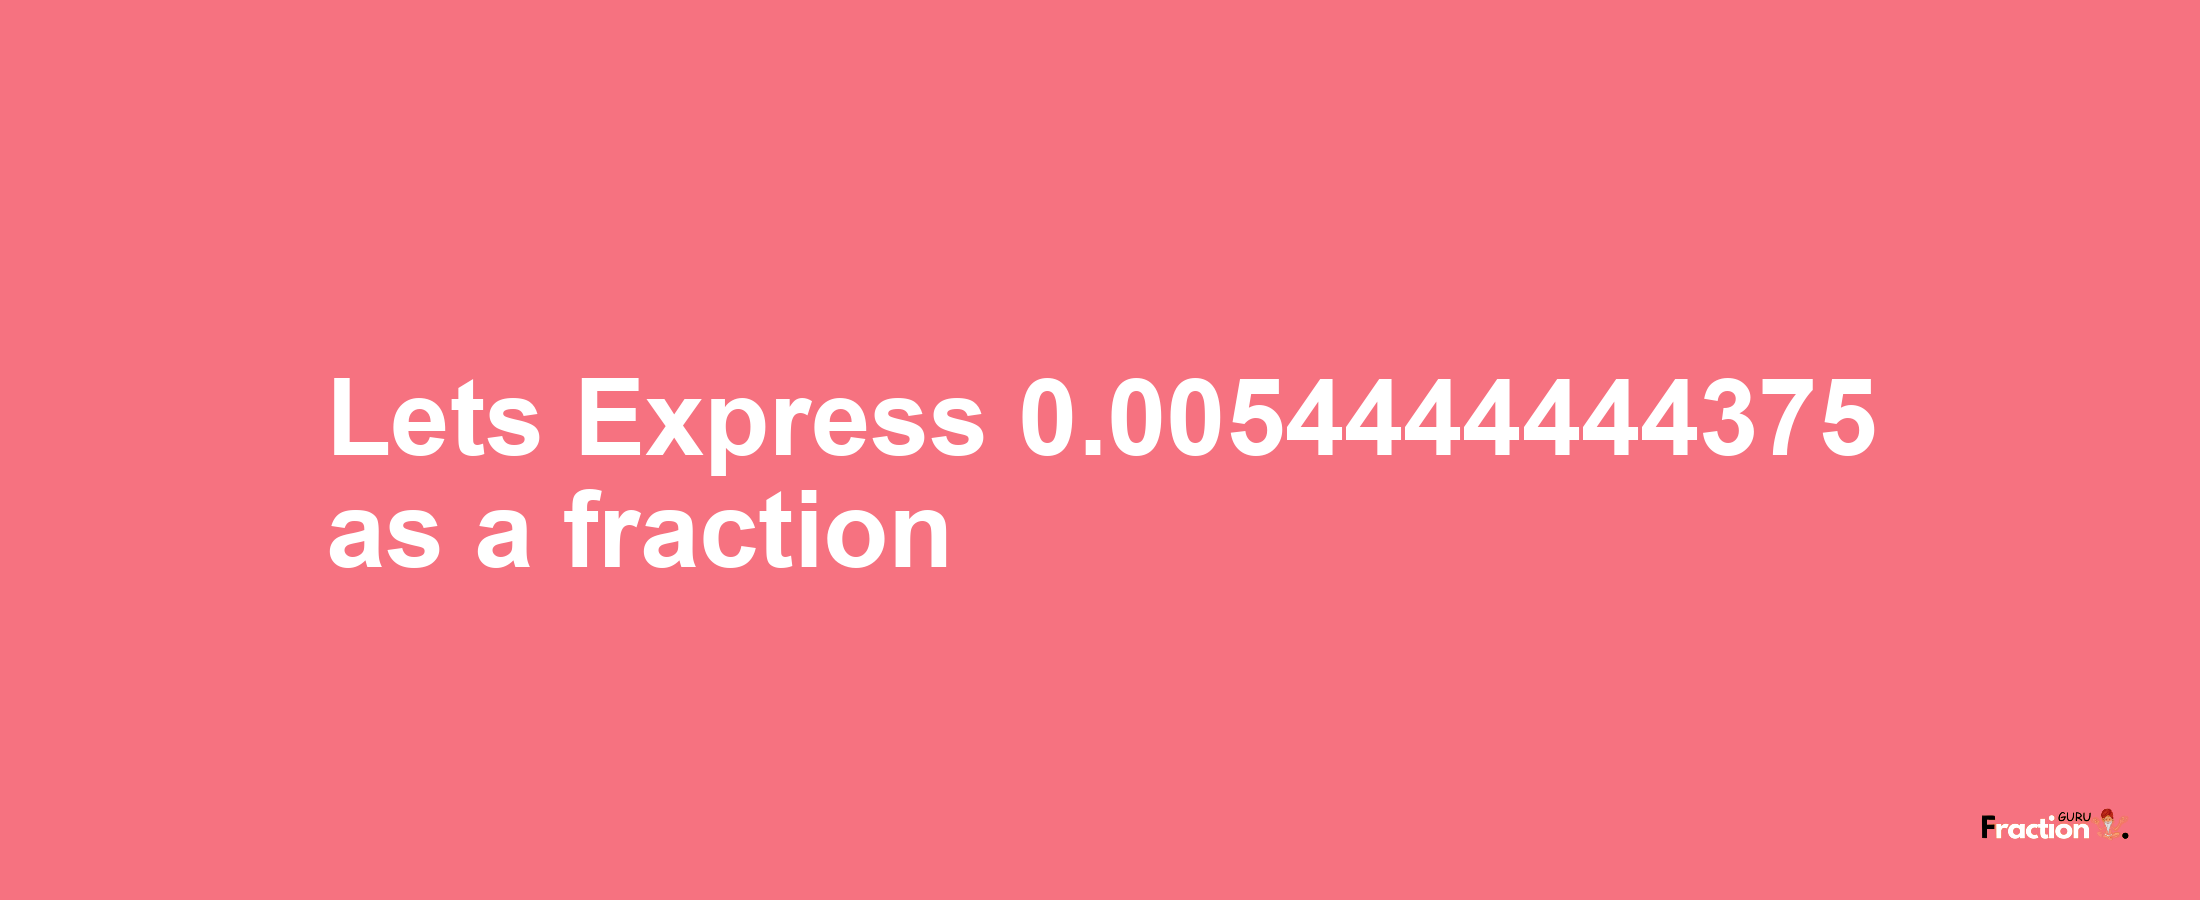 Lets Express 0.0054444444375 as afraction